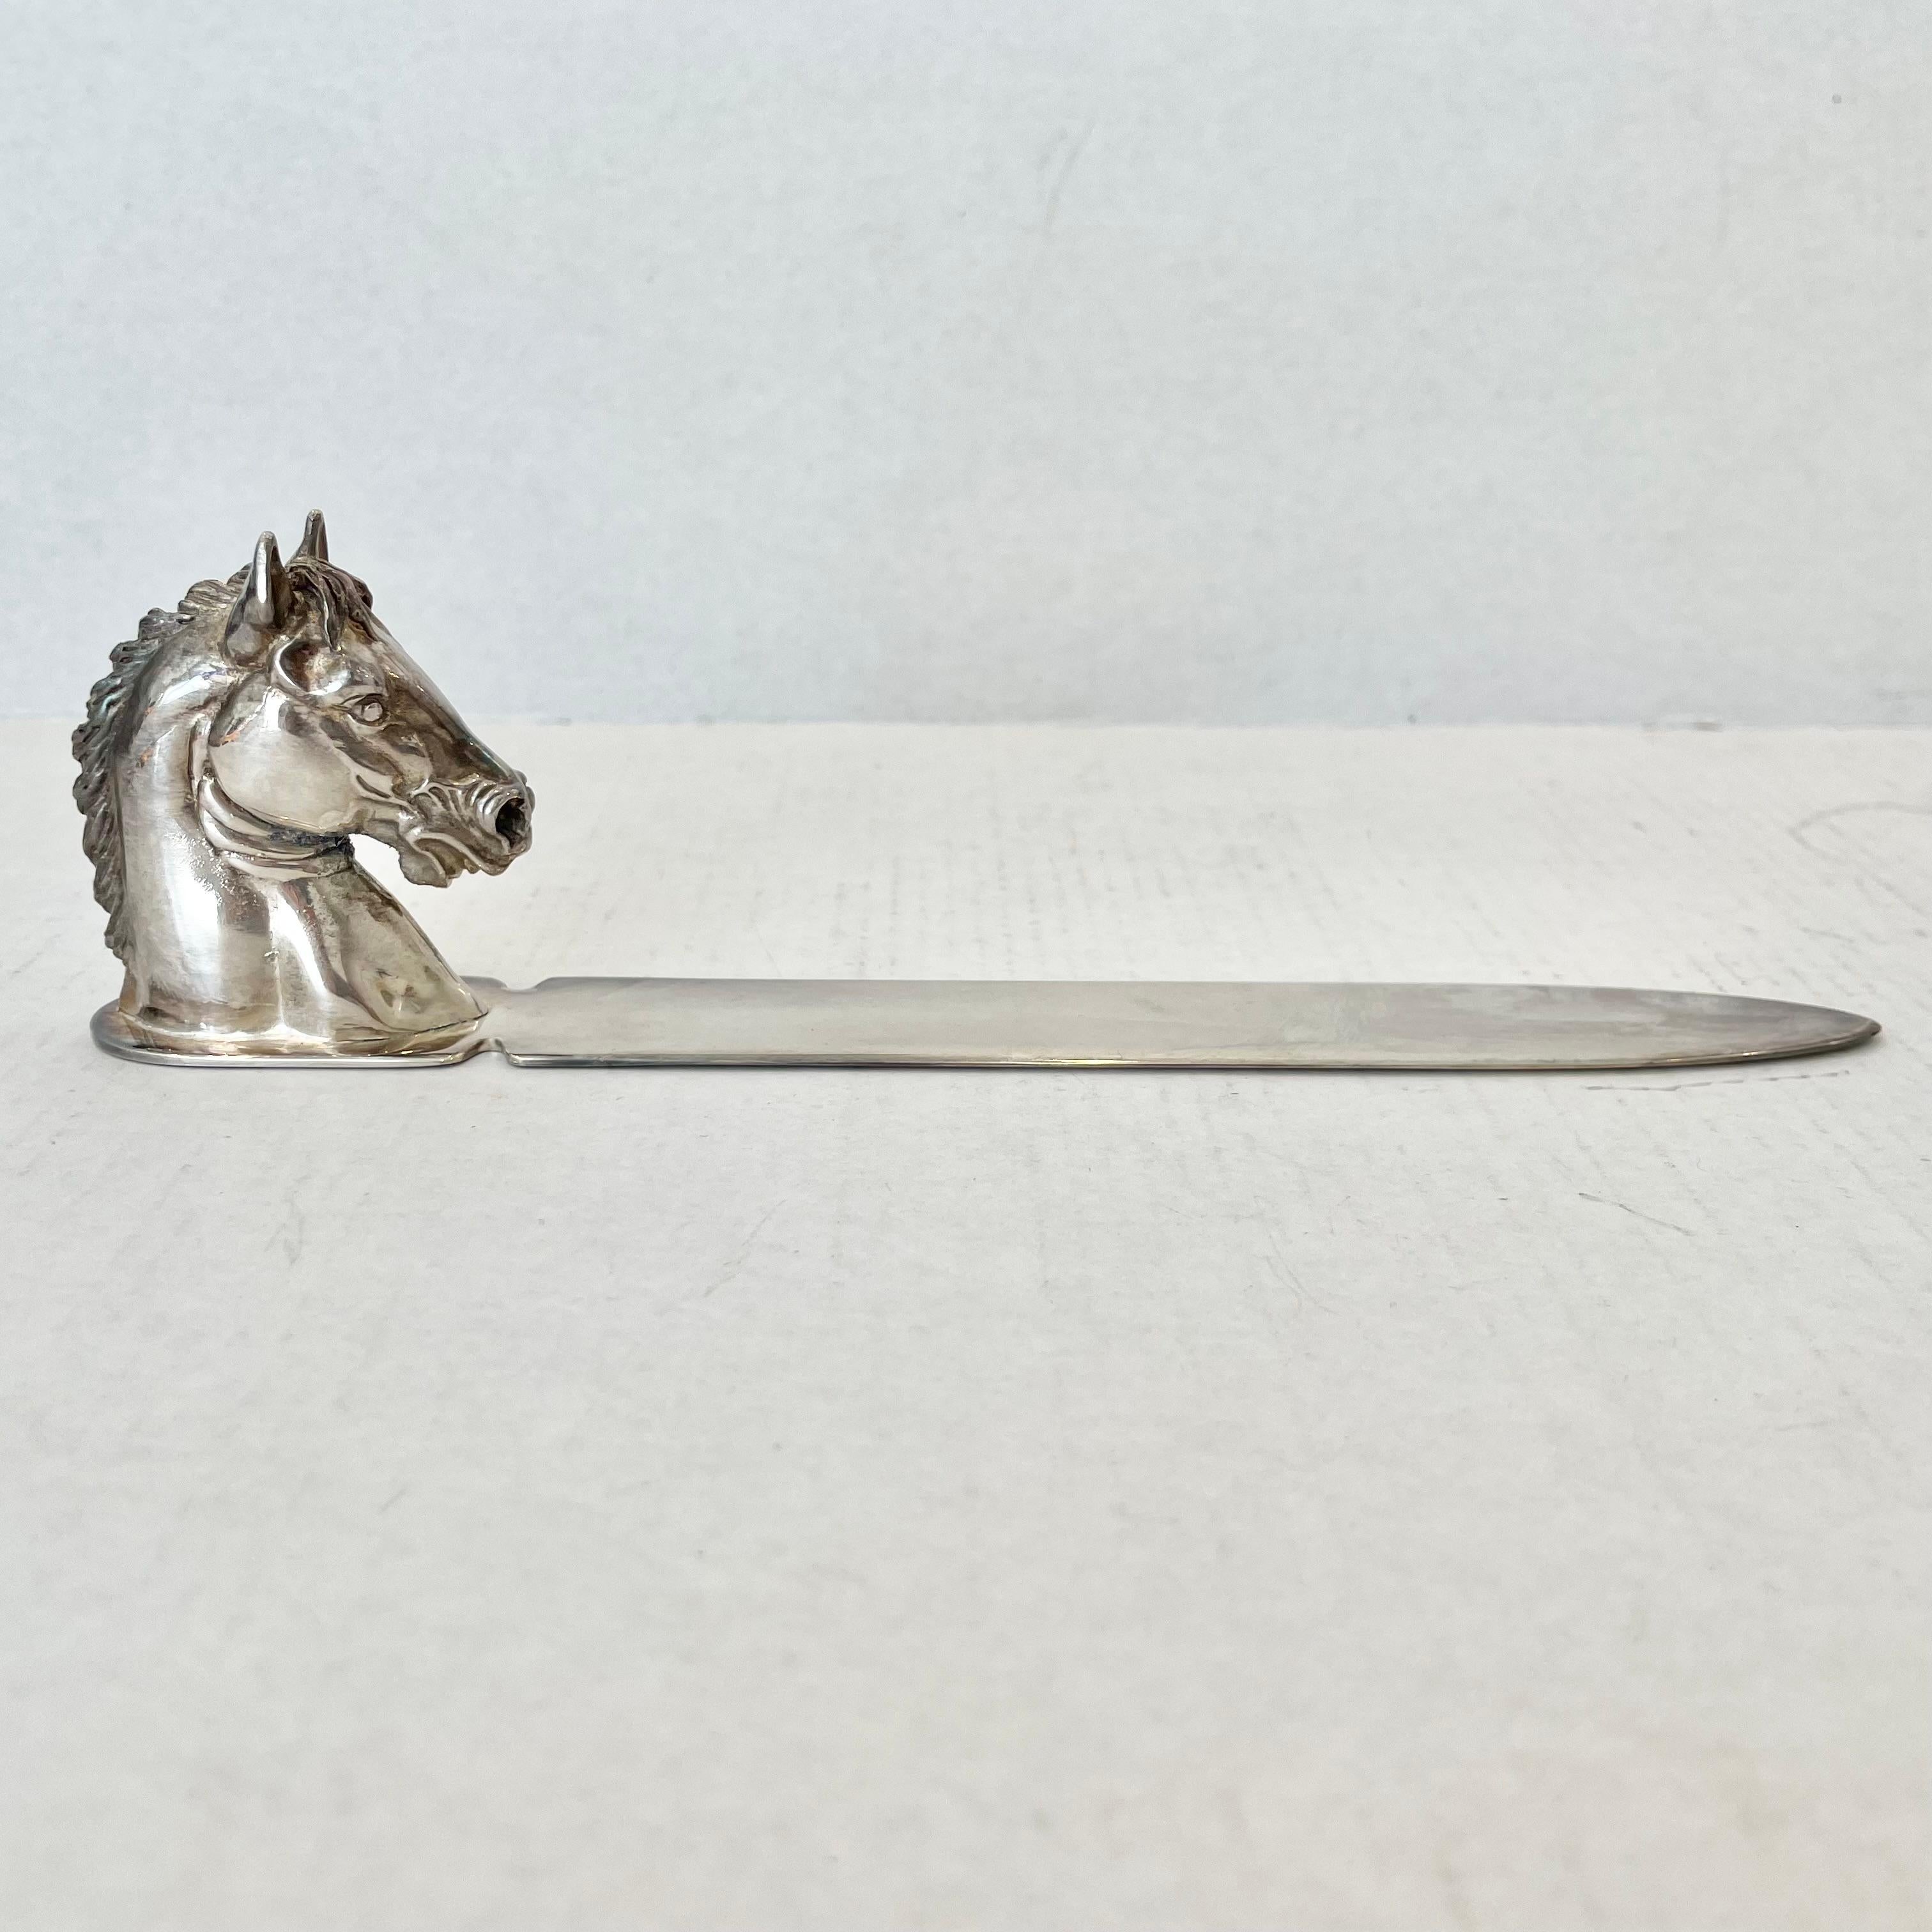 Great Reed & Barton letter opener with a detailed horse head handle in solid silver plated metal. Reed & Barton 274 stamped on the base of the handle. Elegant patina to the silver. This piece is a stunning and practical addition to elevate your